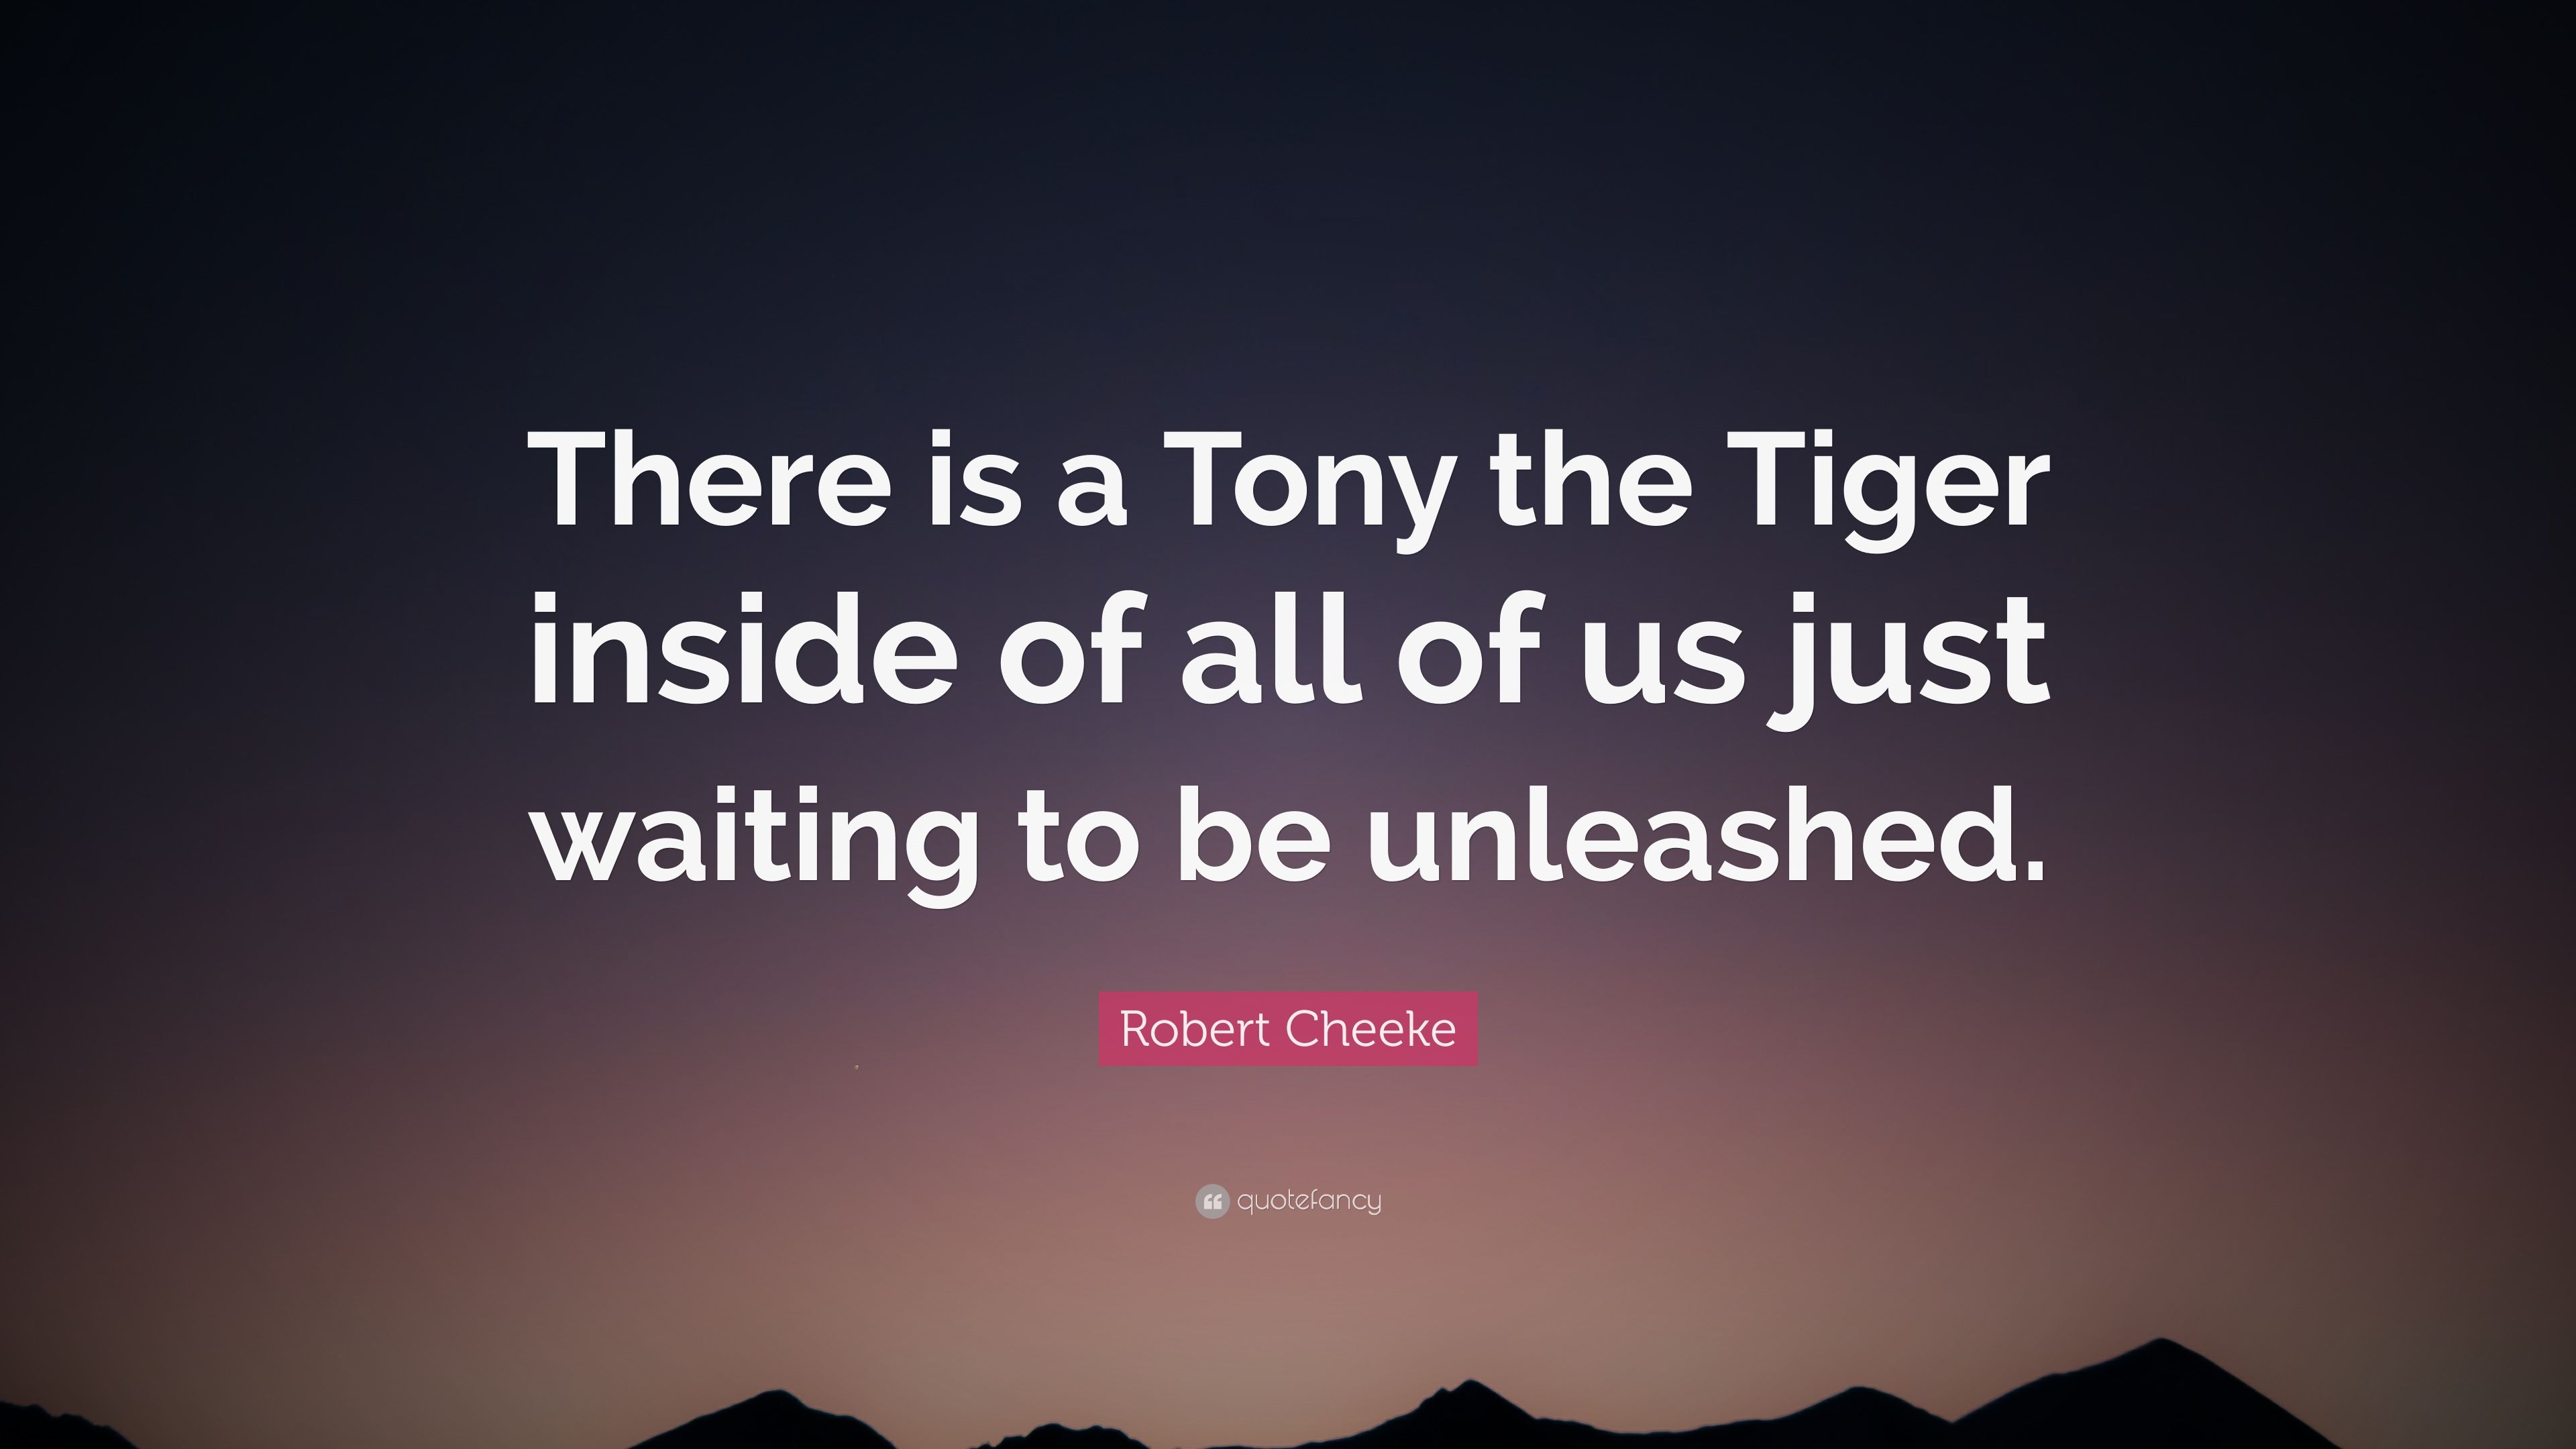 Robert Cheeke Quote: “There is a Tony the Tiger inside of all